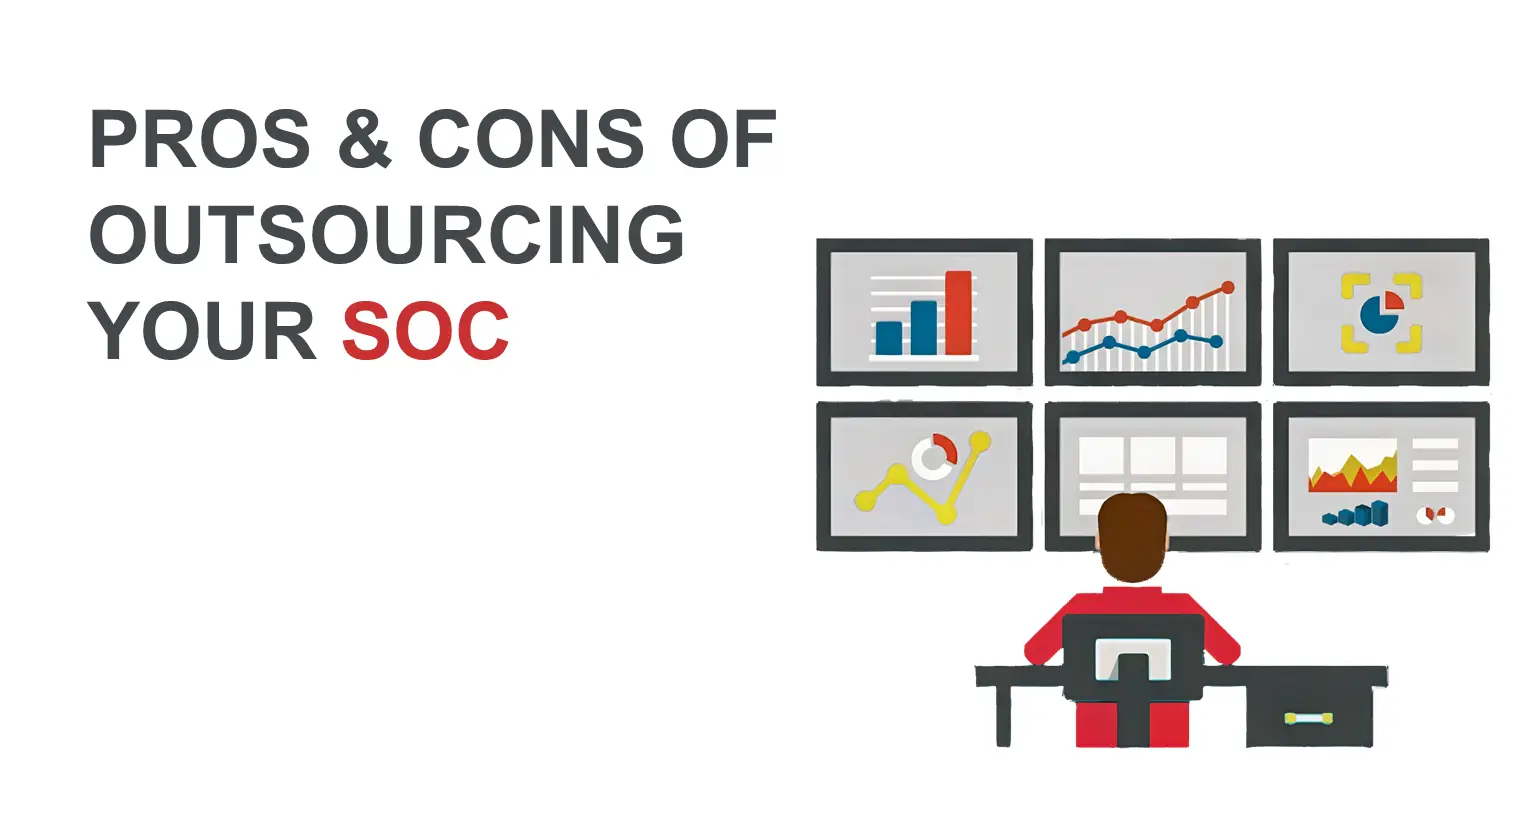 Pros And Cons of Outsourcing Your SoC